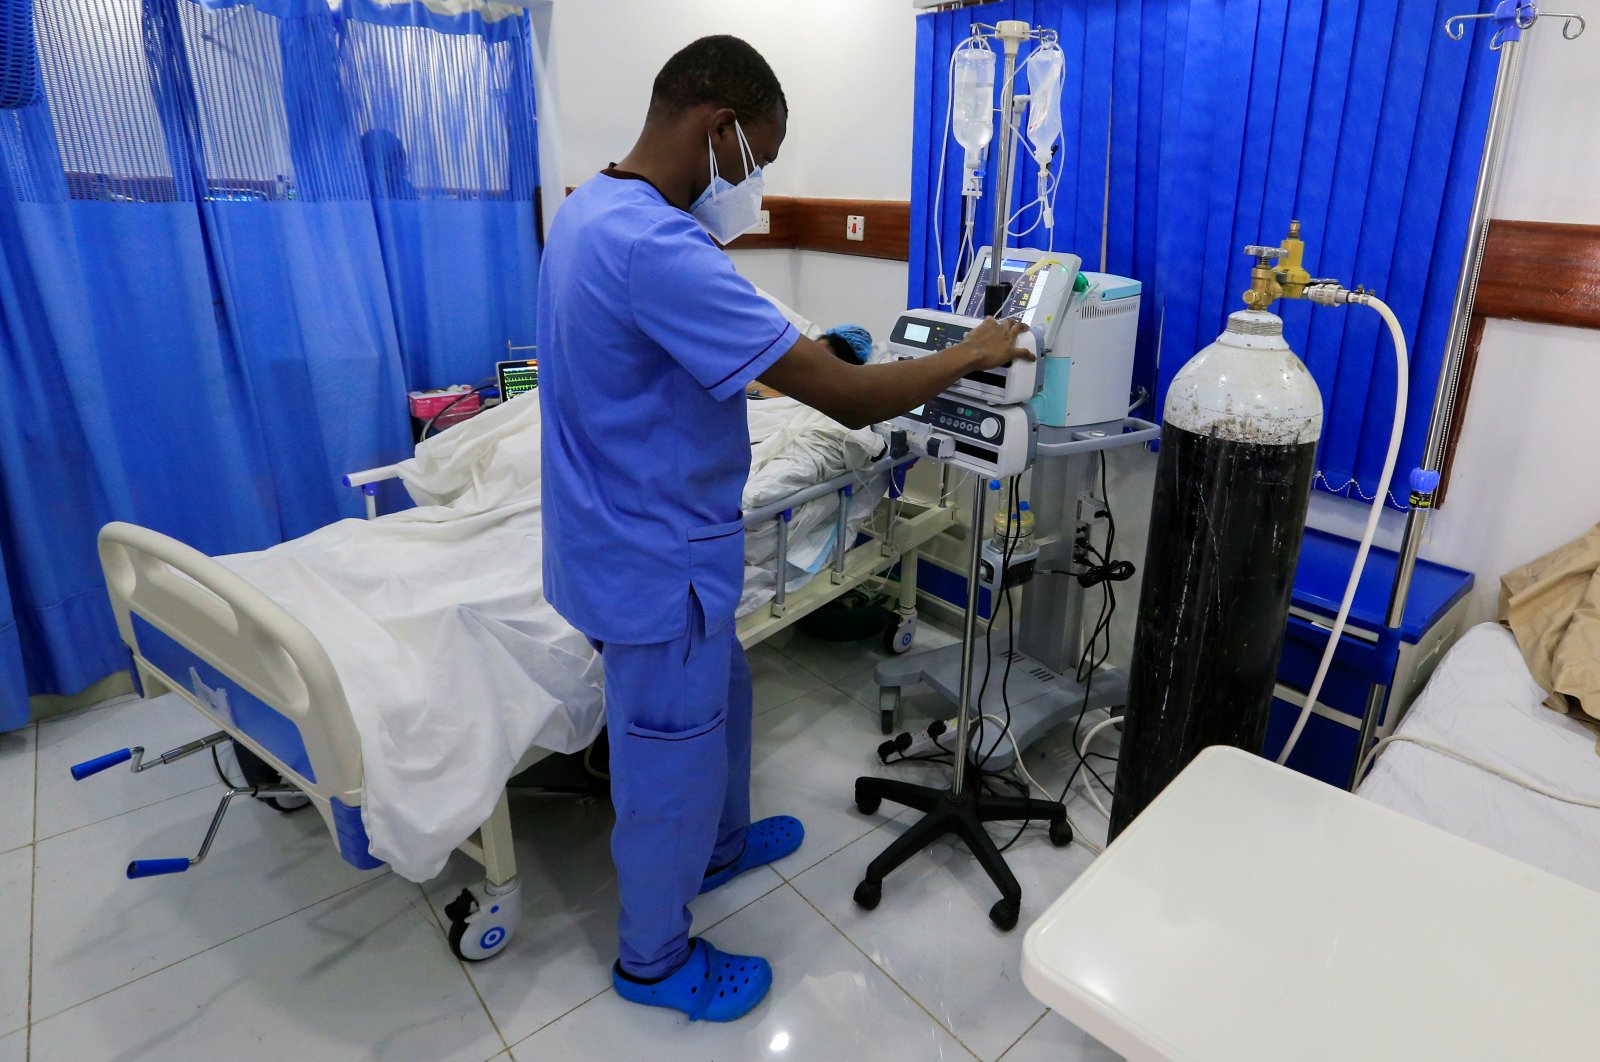 A health care worker attends to a patient with coronavirus inside the Intensive Care Unit (ICU) ward at the Care Hospital, Nairobi, Kenya, Aug. 4, 2021. (Reuters Photo)